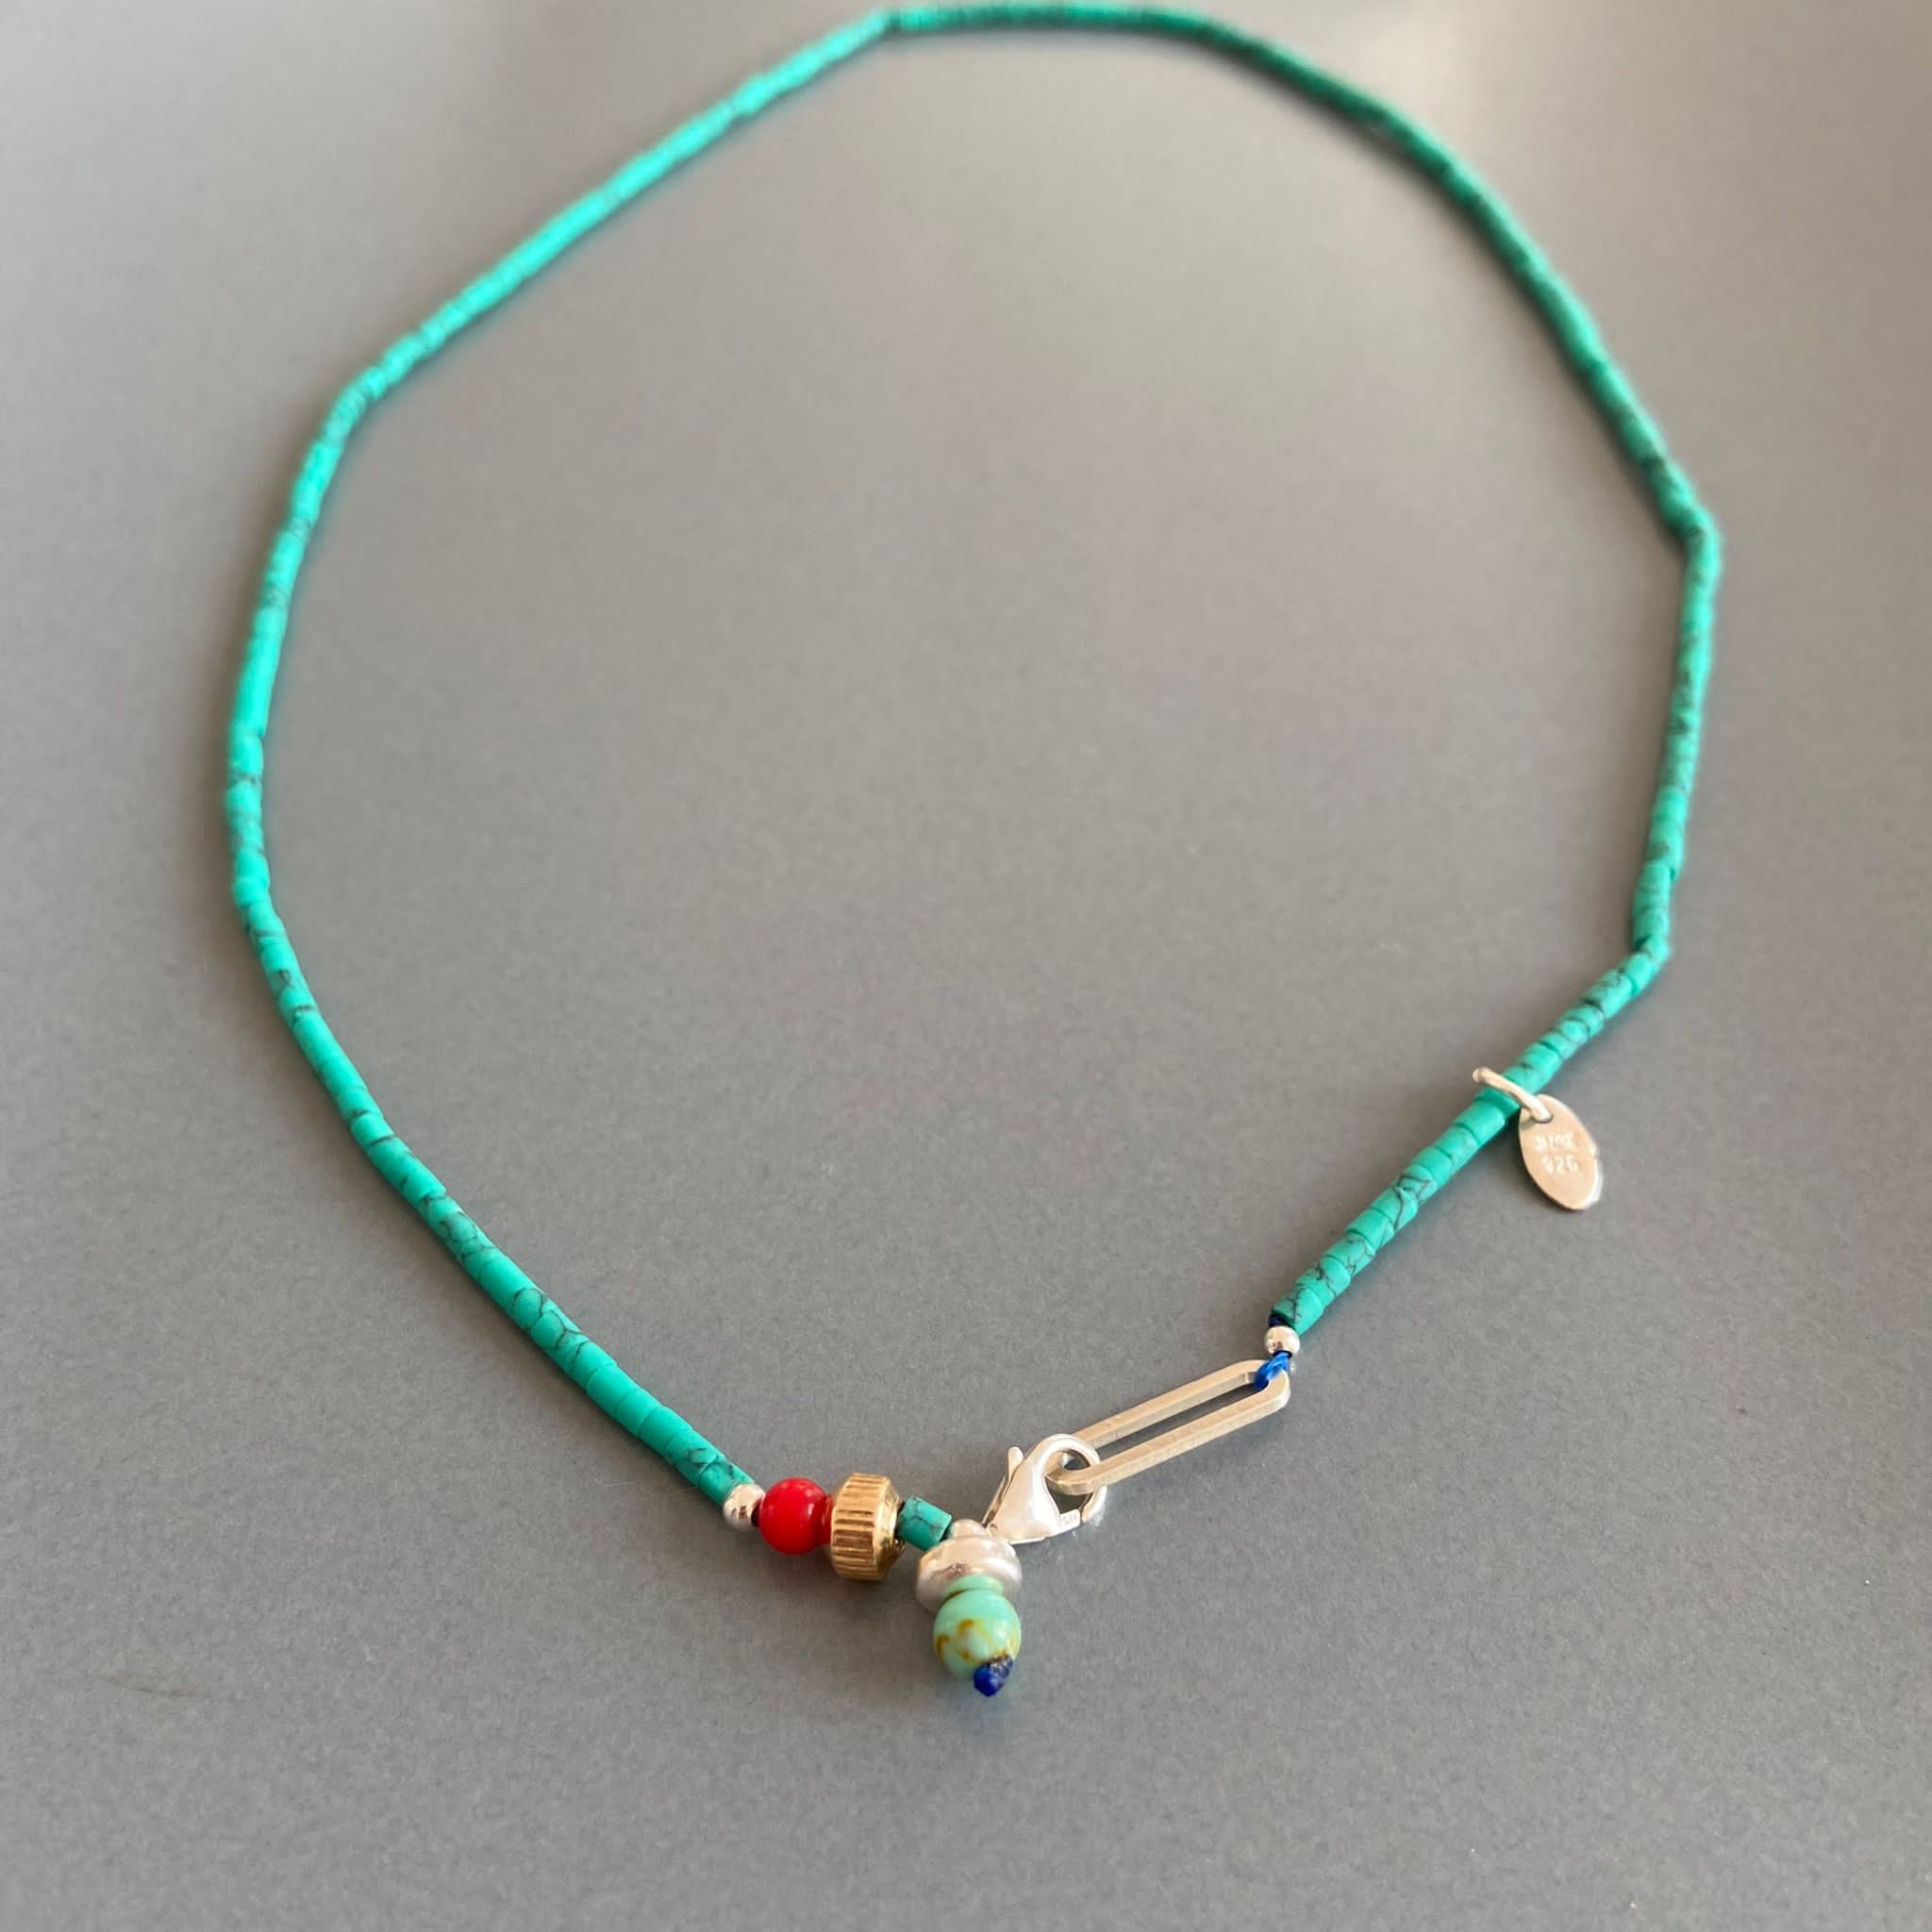 Nickie Turquoise Women's Necklace